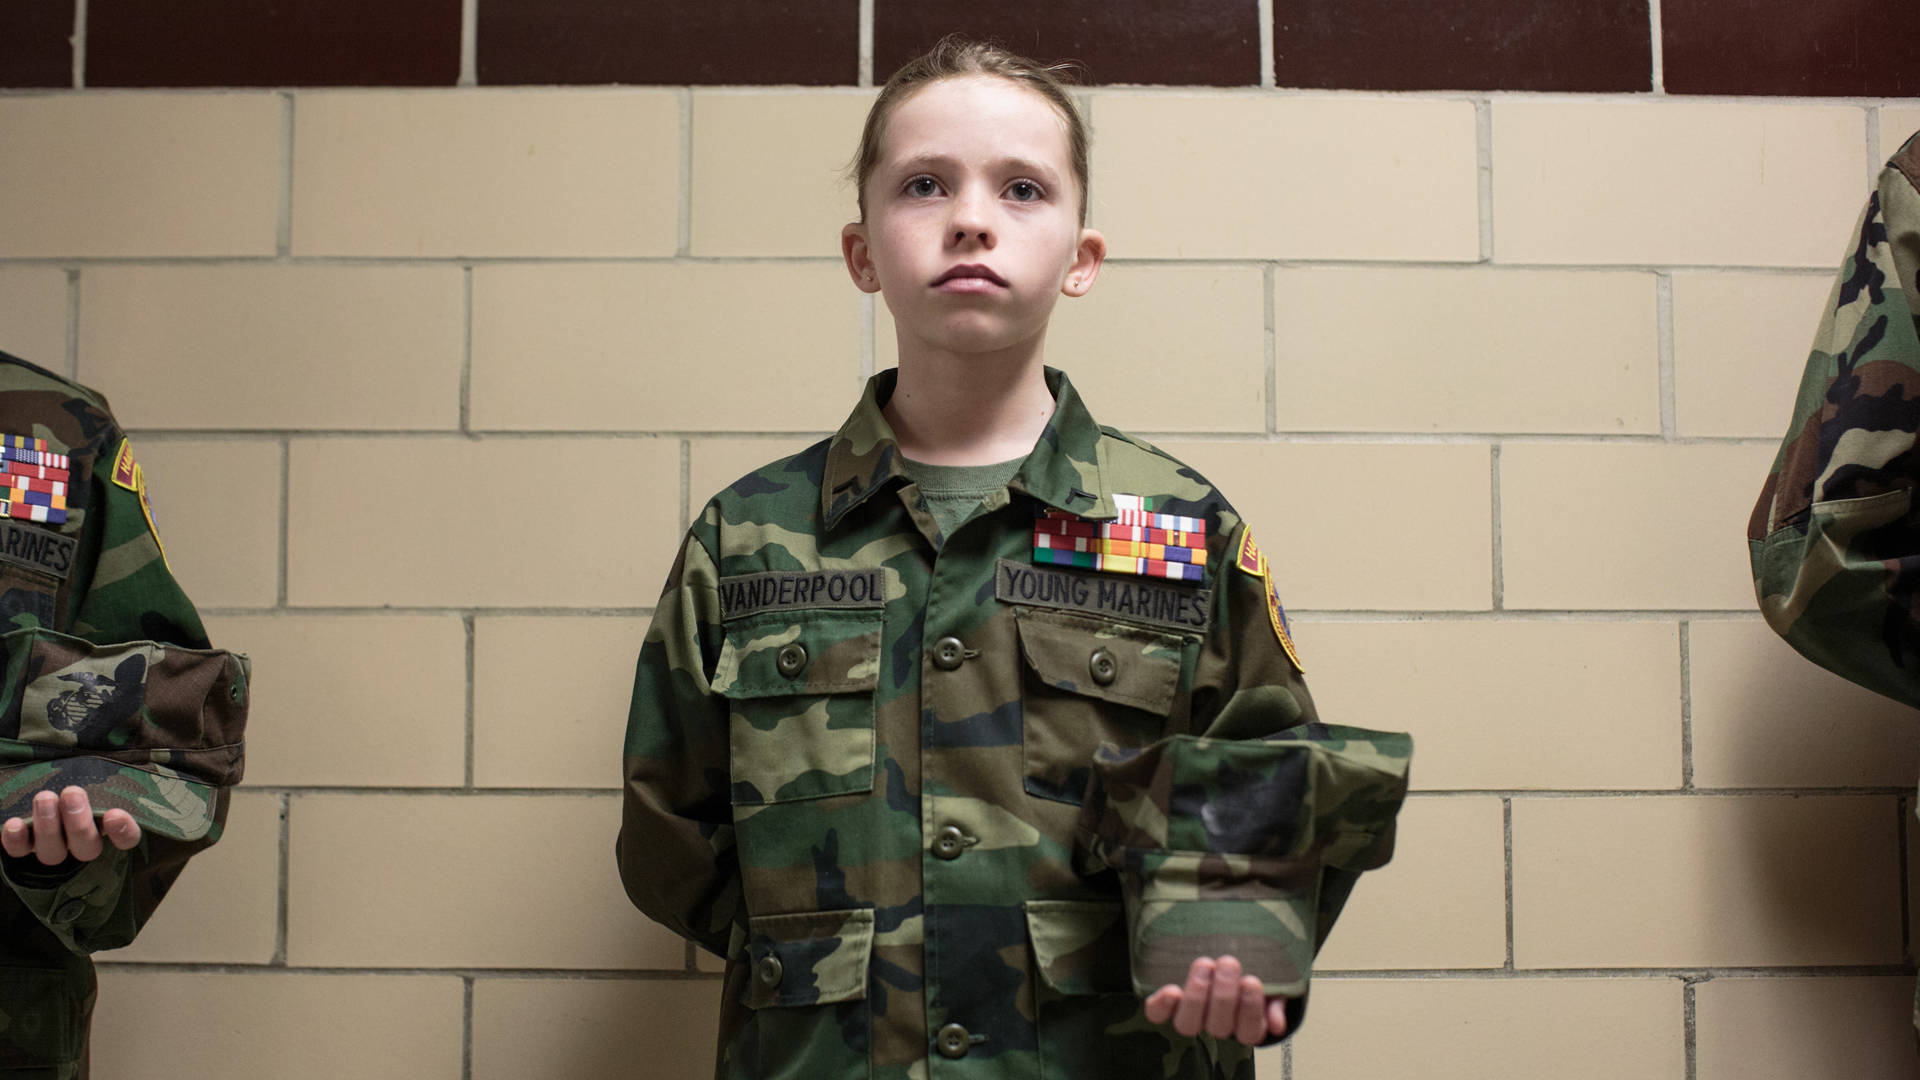 Sarah Blesener, from 'Beckon Us From Home,' 2017. An 11-year-old Young Marines recruit holds her pose during uniform inspection in Hanover, Pennsylvania. Courtesy of Sarah Blesener, 2017 CatchLight Fellow